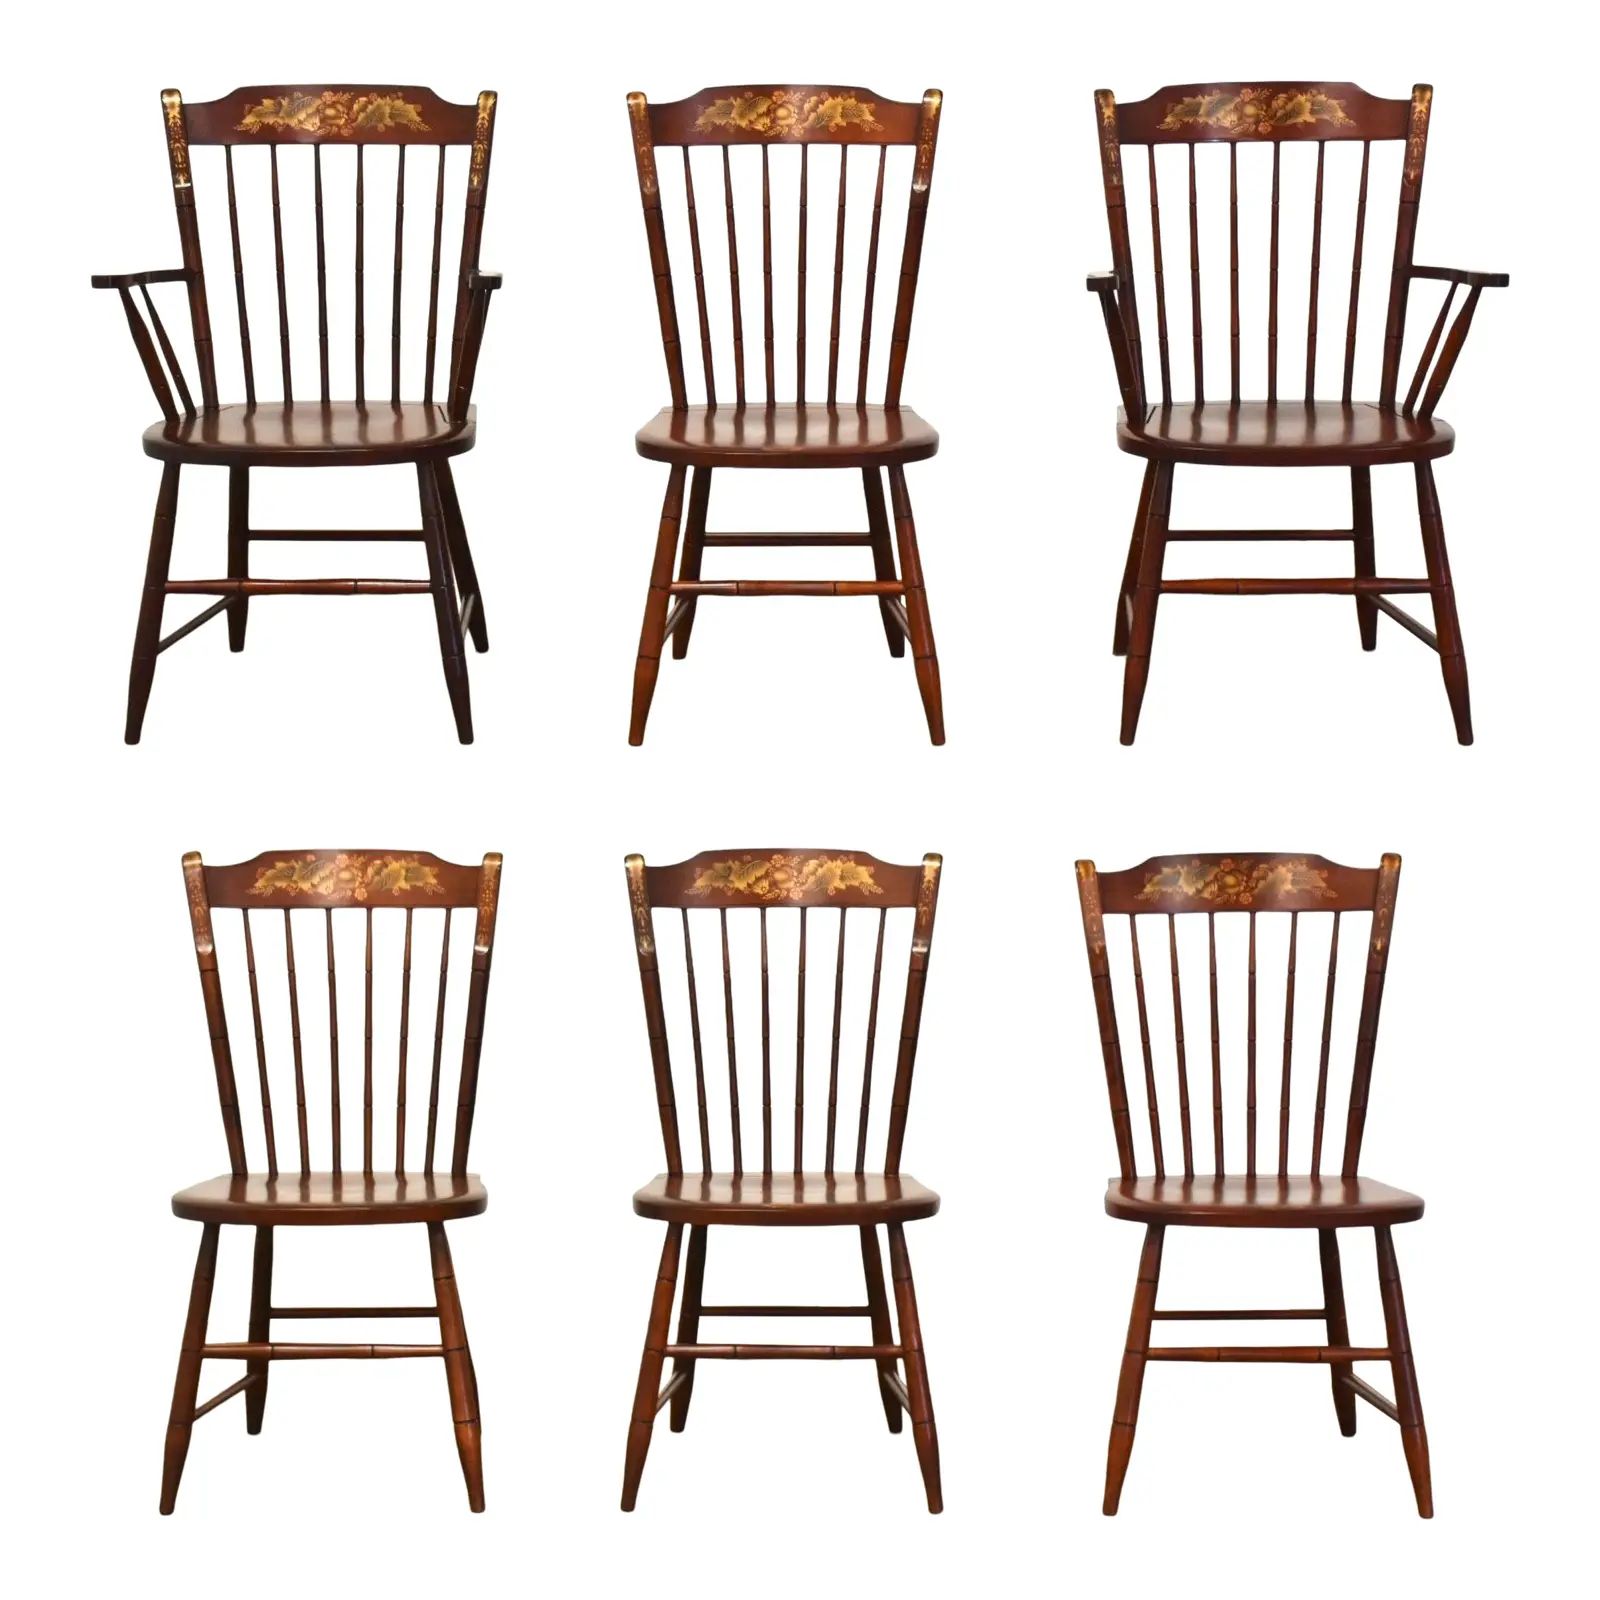 Hitchcock Solid Maple Dining Chairs- Set of 6 | Chairish